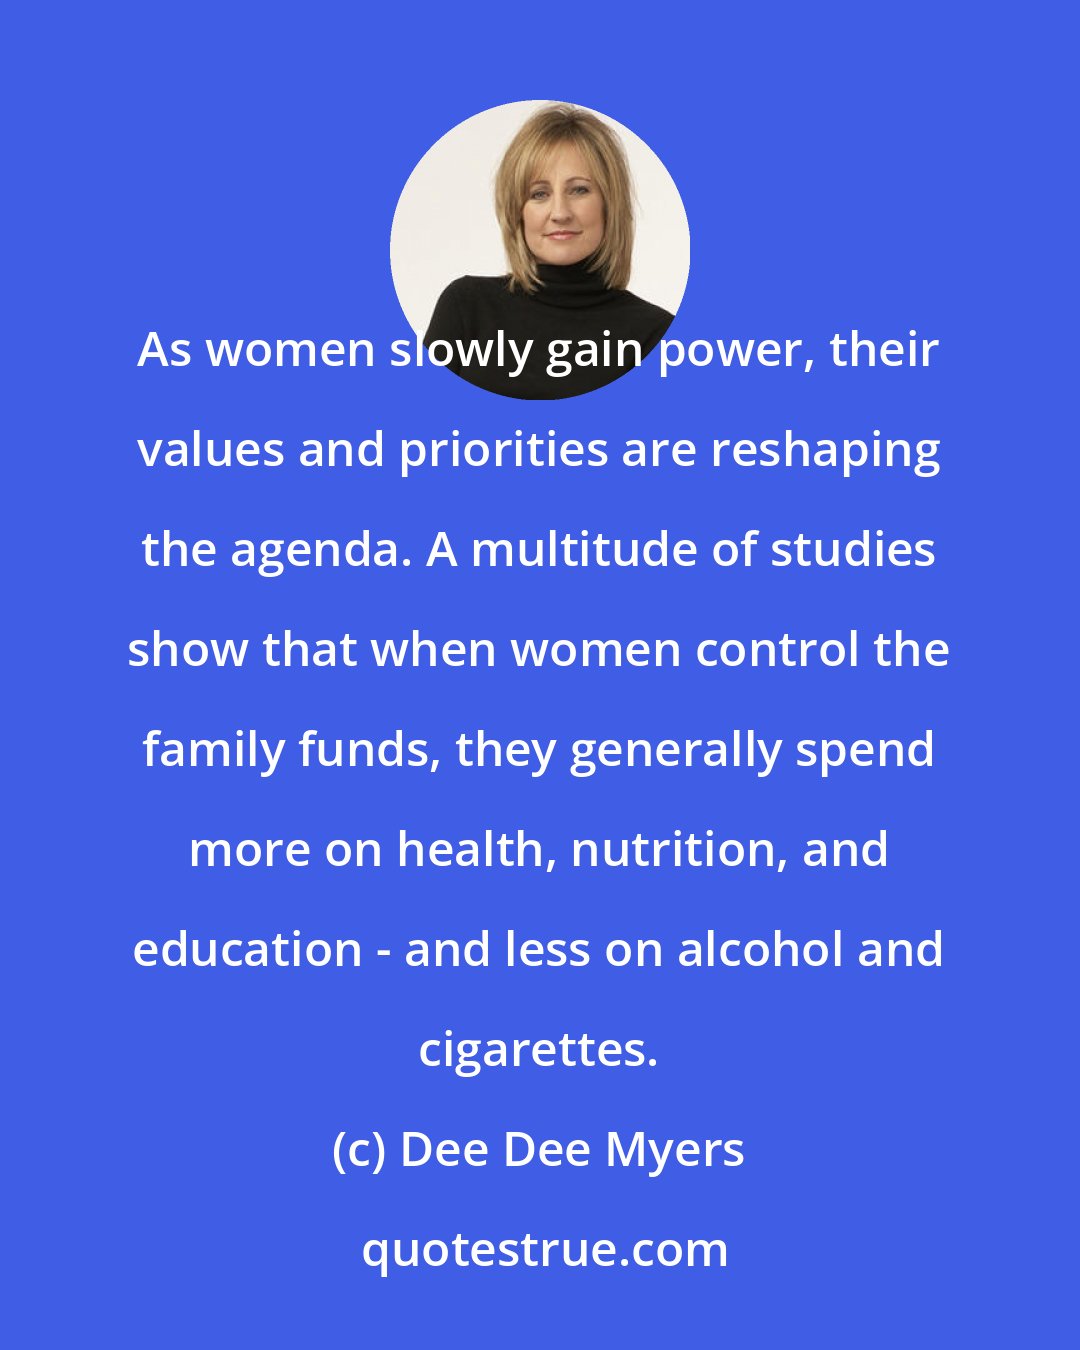 Dee Dee Myers: As women slowly gain power, their values and priorities are reshaping the agenda. A multitude of studies show that when women control the family funds, they generally spend more on health, nutrition, and education - and less on alcohol and cigarettes.